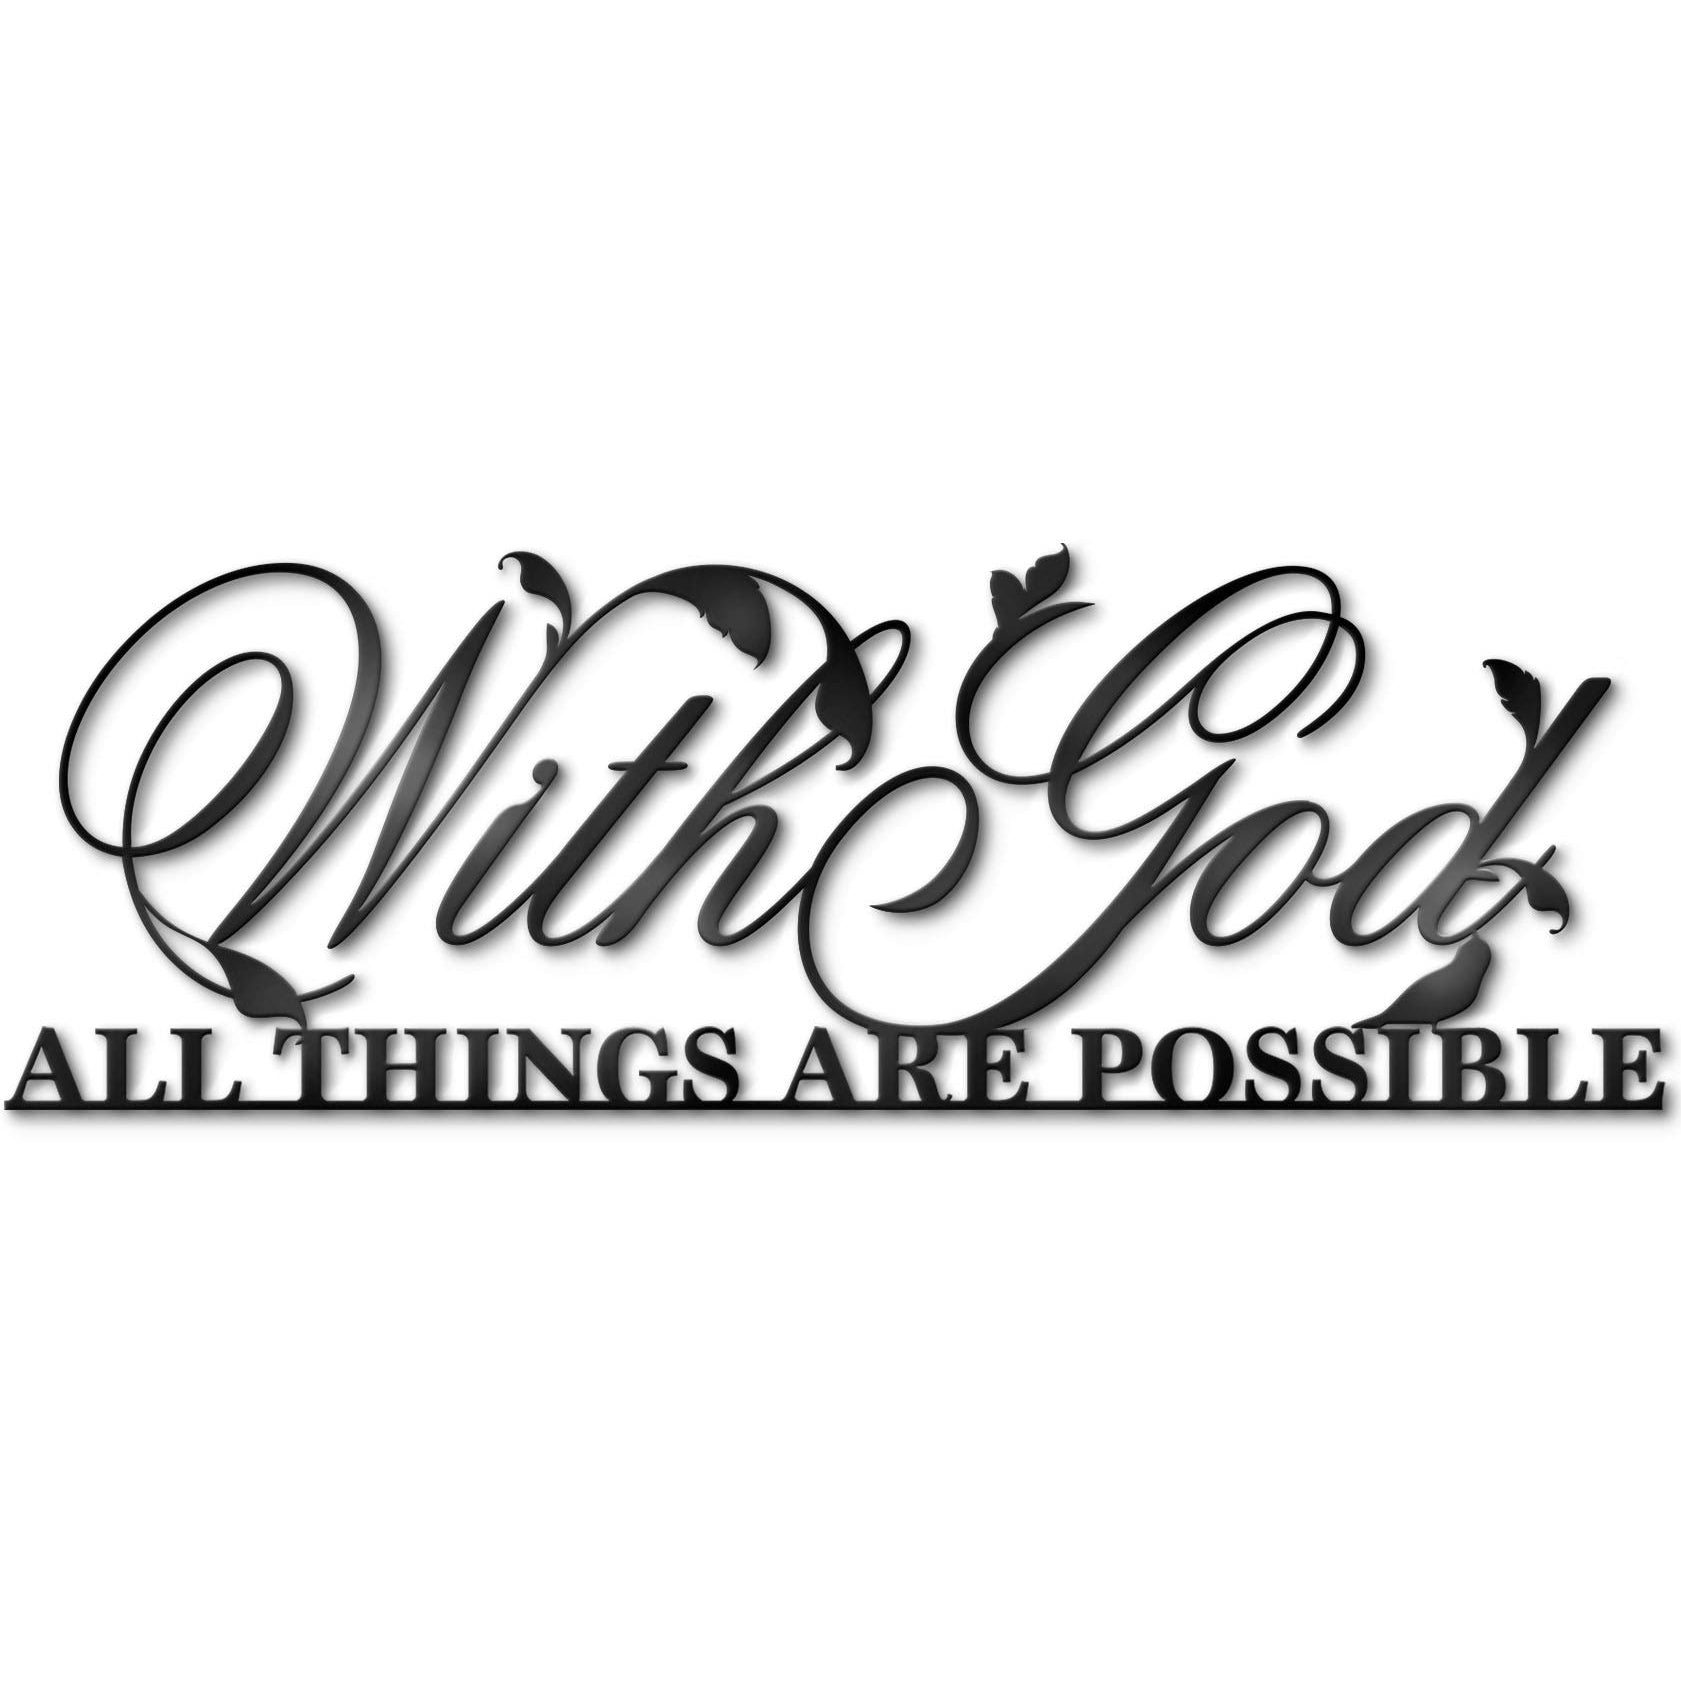 Gialer With God All Things Are Possible Sign Metal Wall Decor, 18"X12" Inch Religious Scripture Black Christian Bible Verses Everthing Is Possible with God Bibical Wall Hanging Decoration